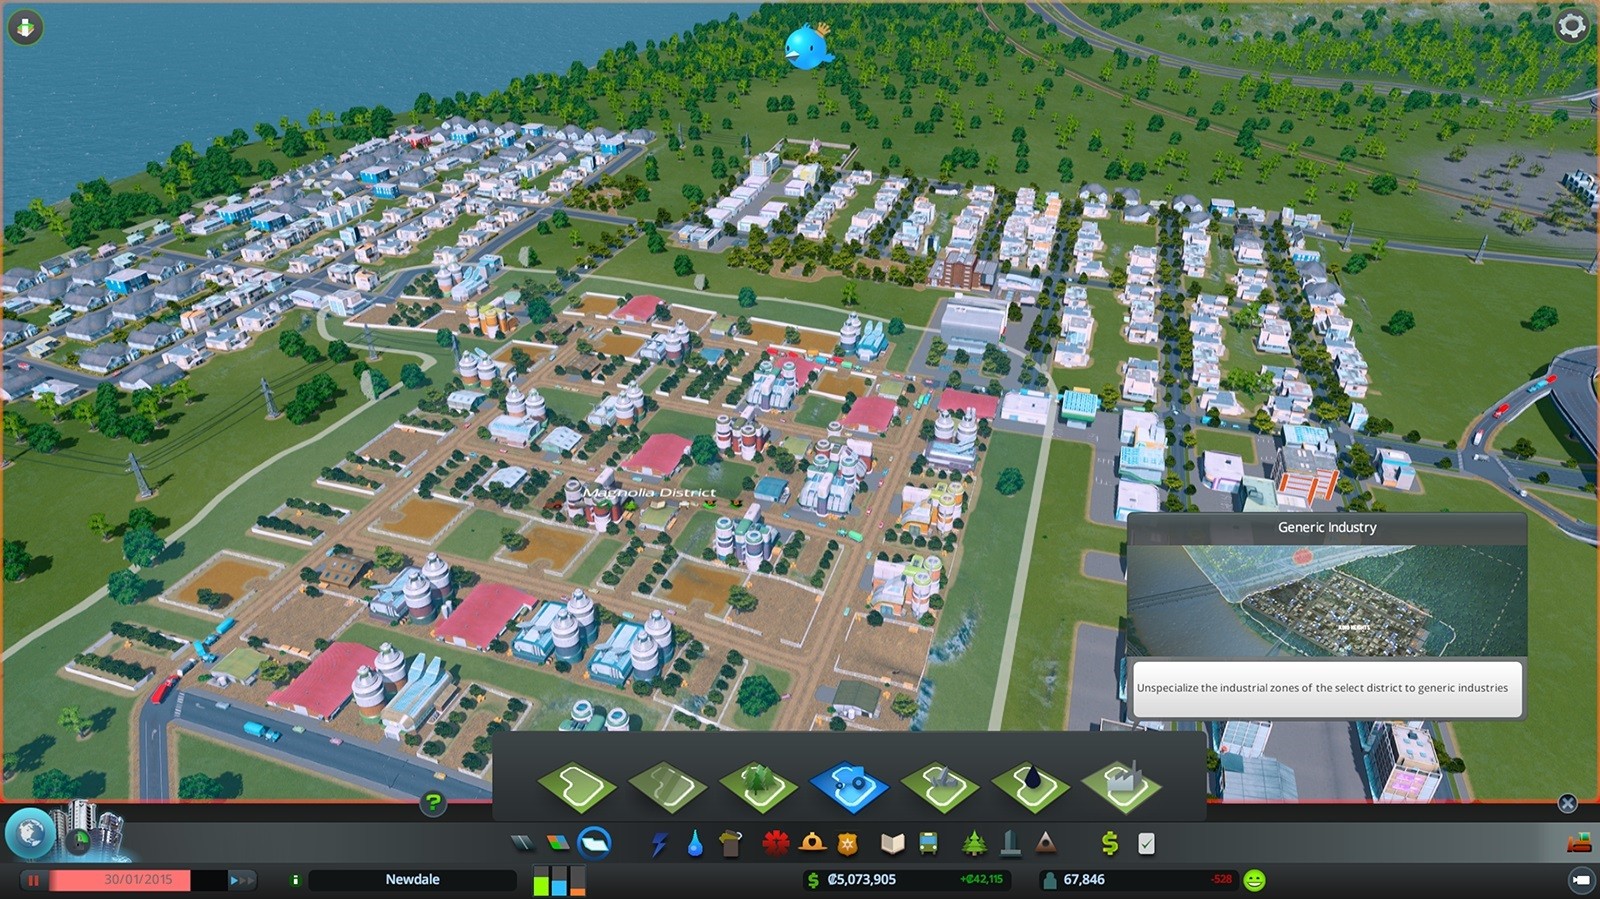 Cities-Skylines-Dev-Diary-Explains-How-Districts-and-Policies-Shape-a-City-470748-3.jpg